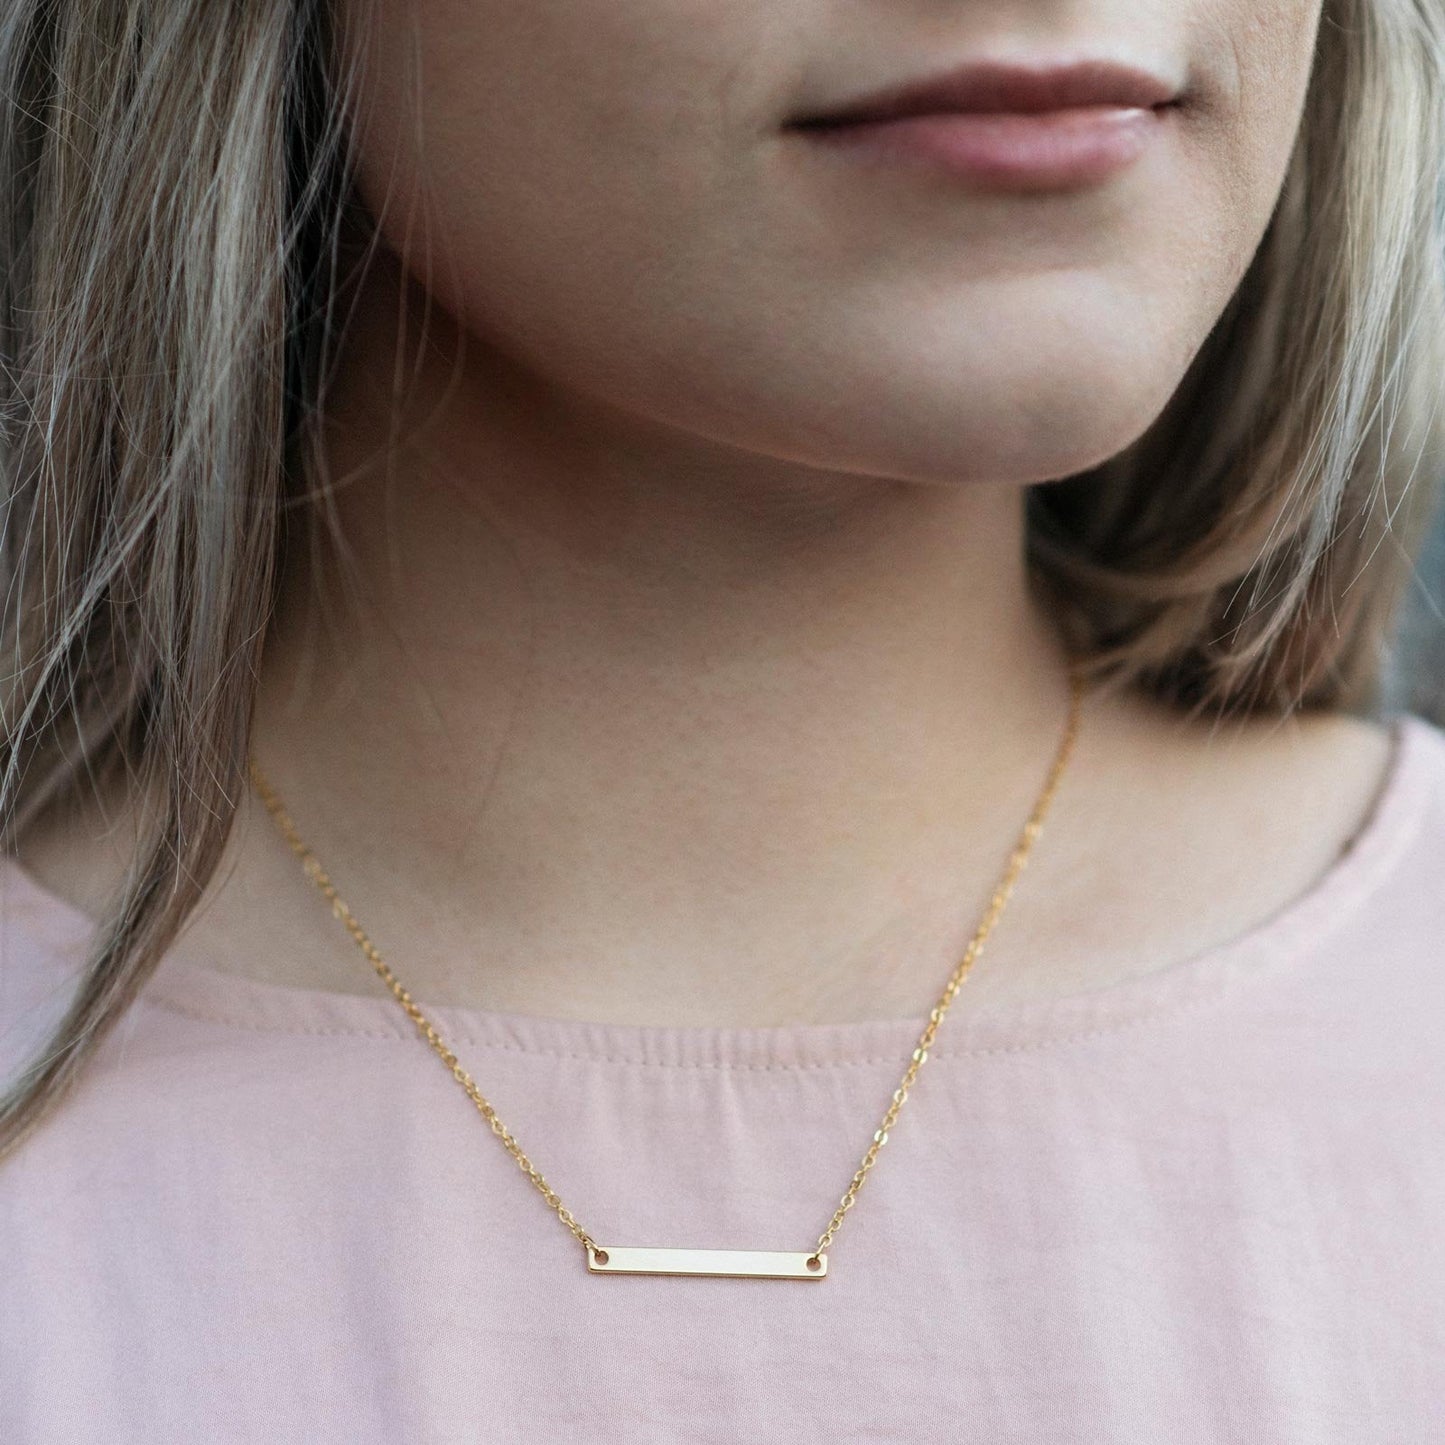 personalized bridesmaid horizontal bar neckless with name or coordinates with gold, silver and rose gold color options 